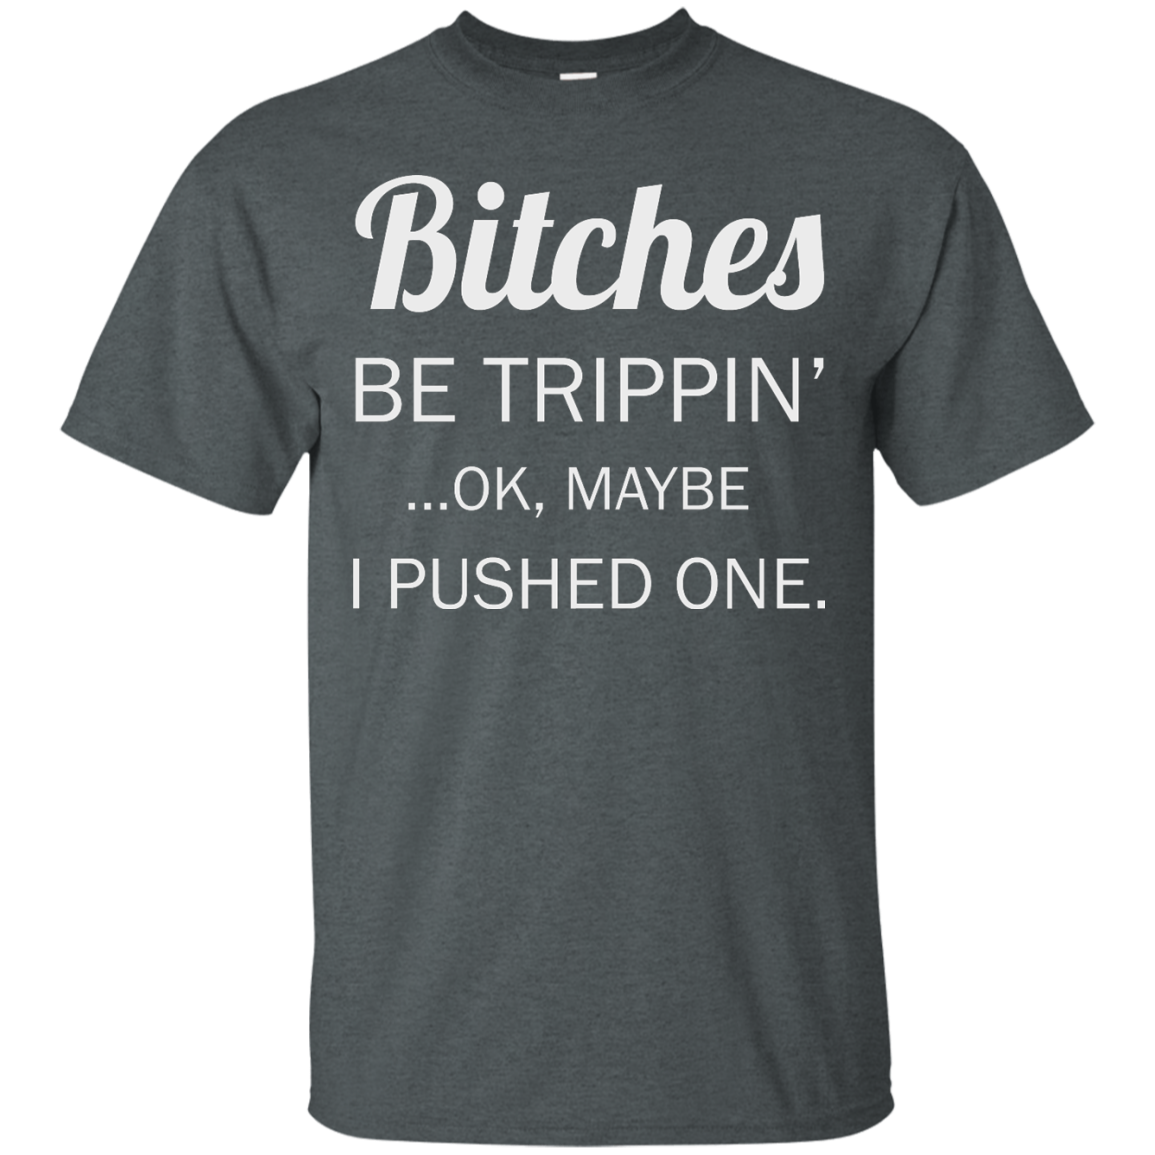 Bitches be trippin ok maybe I pushed one shirt, tank, racerback